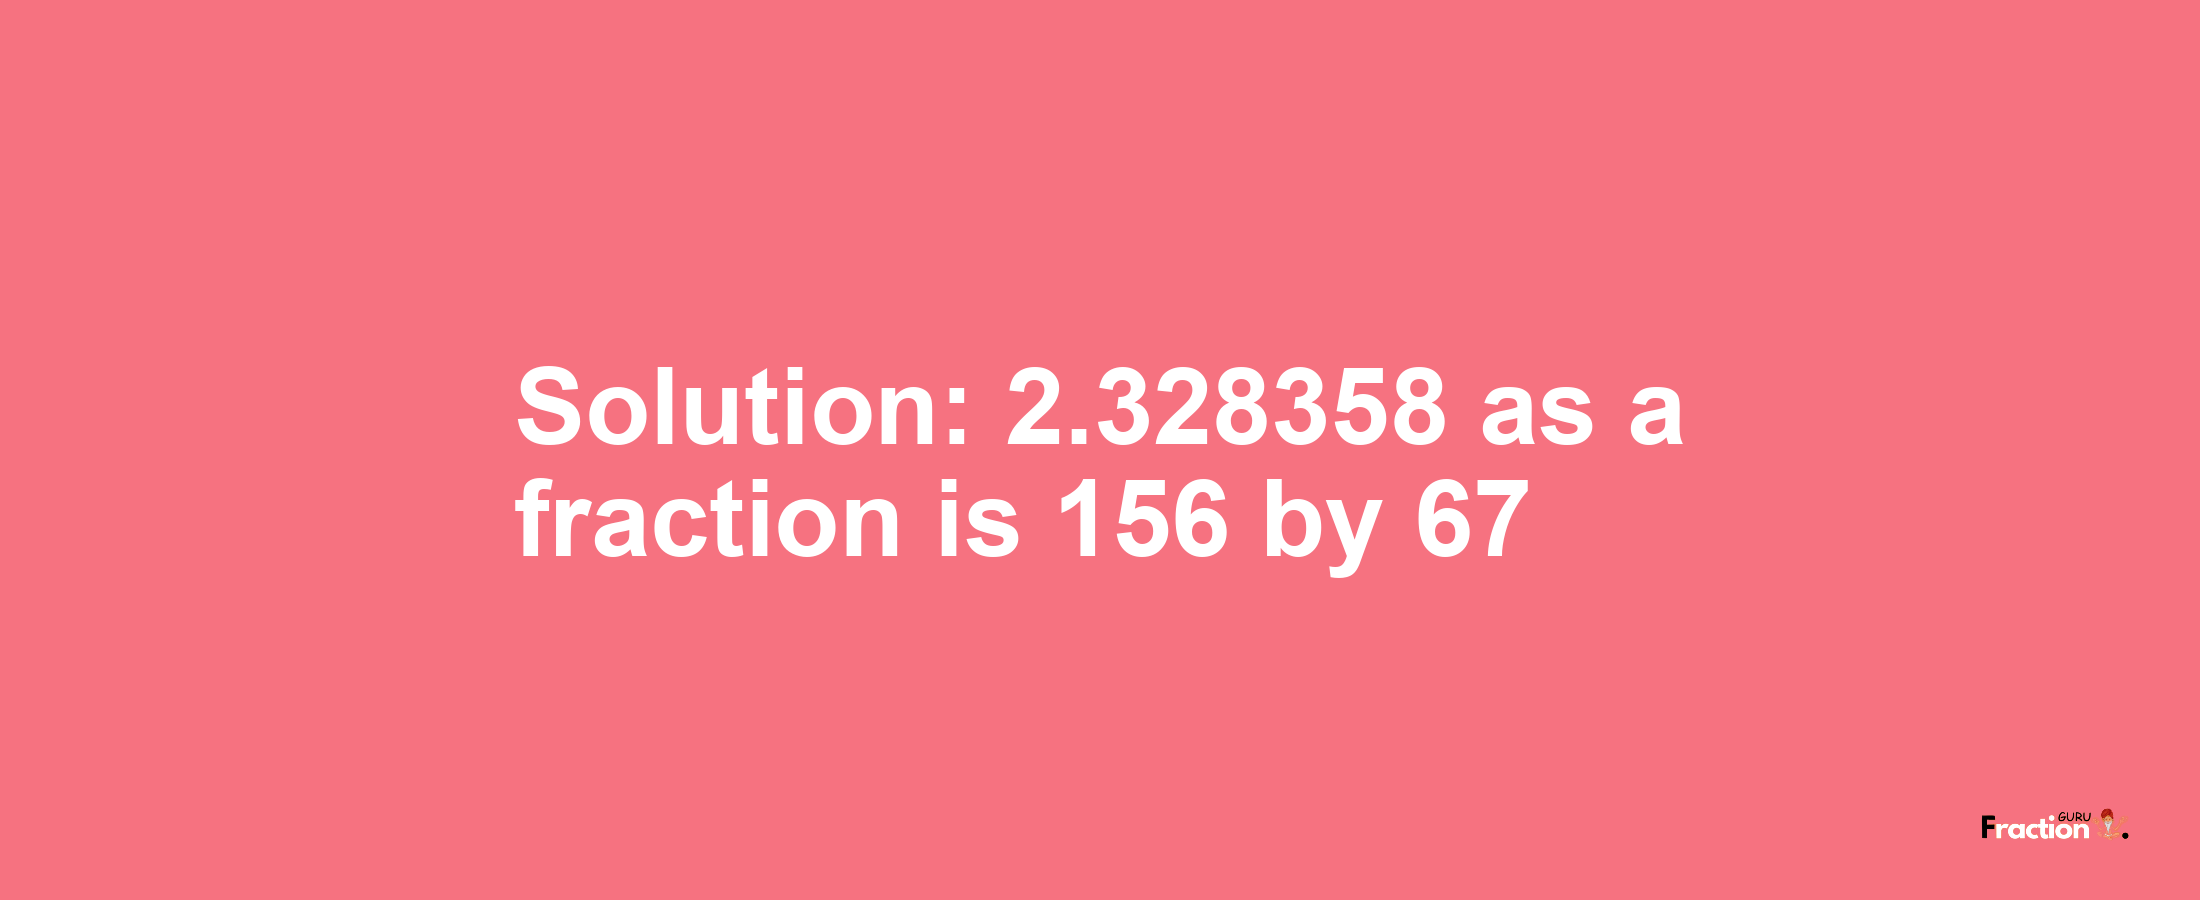 Solution:2.328358 as a fraction is 156/67